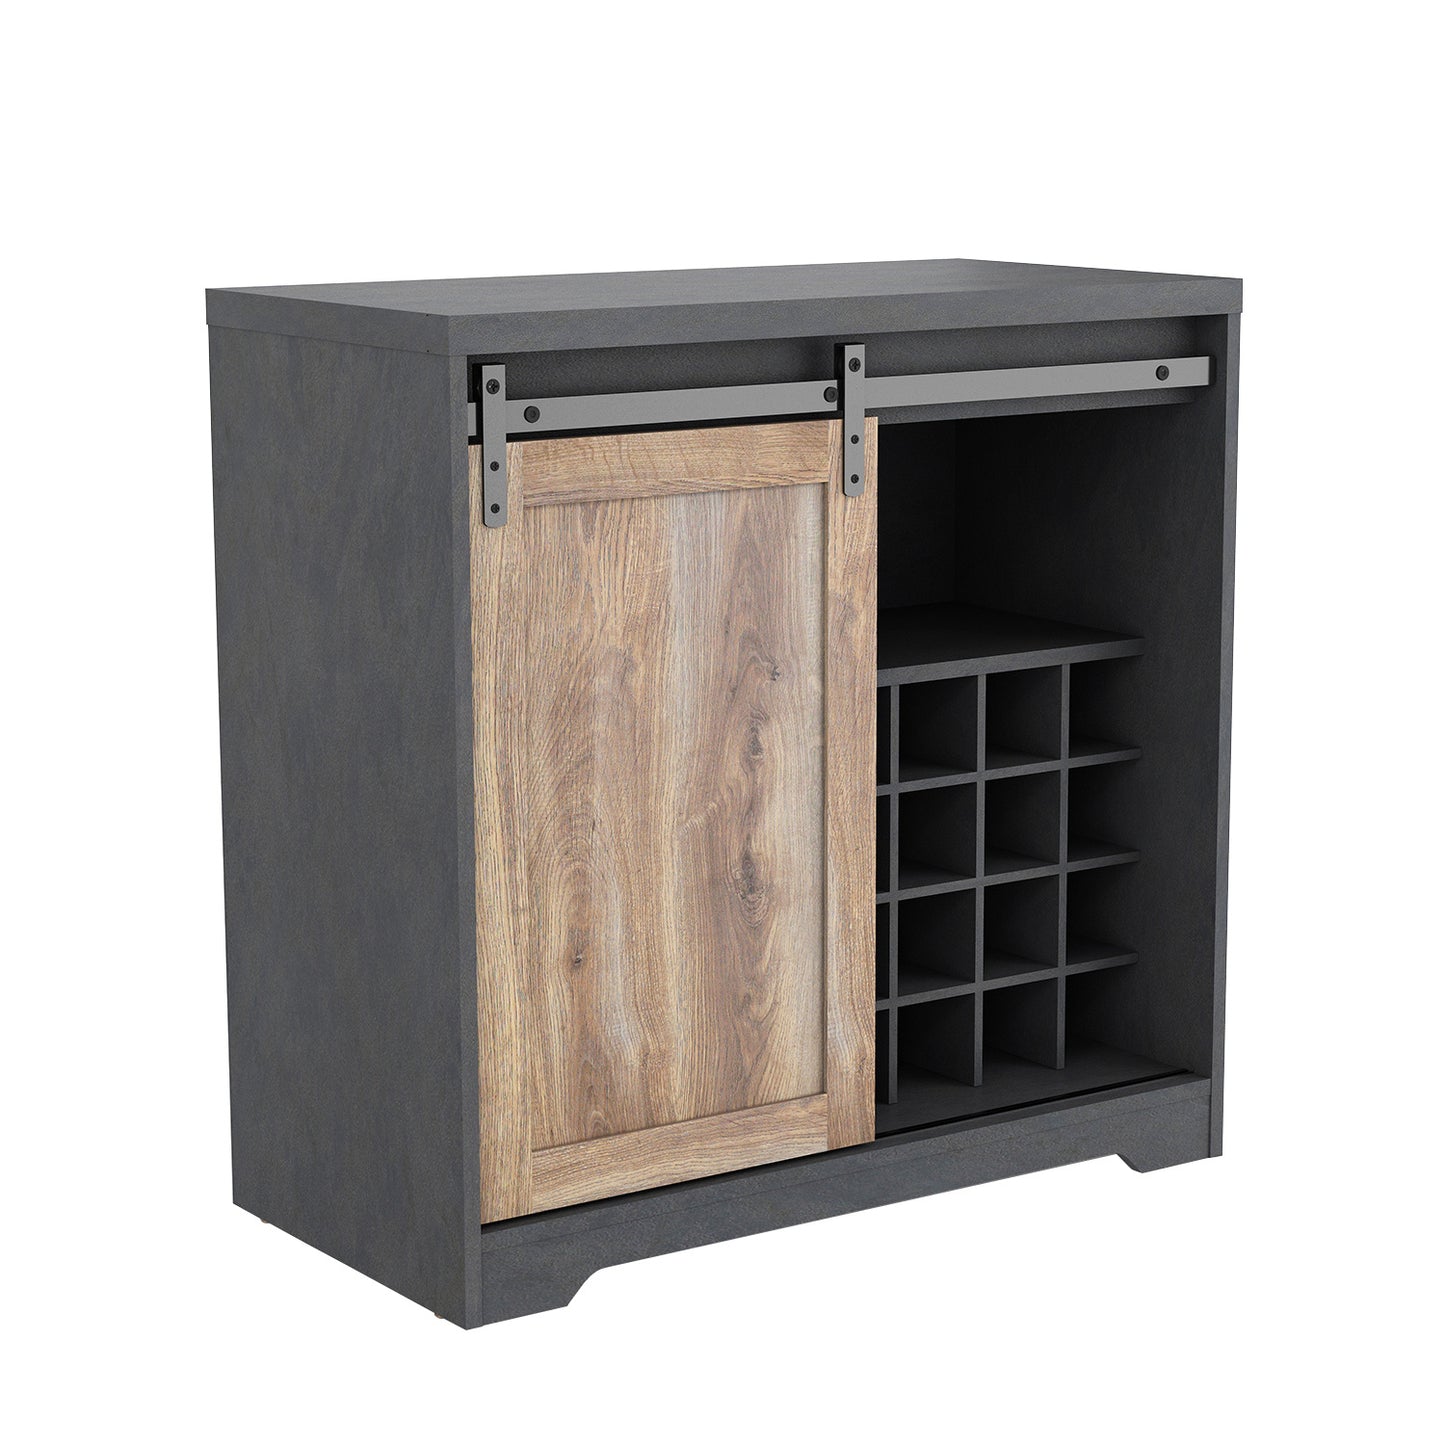 WESOME 31 Inch Farmhouse Barn Door Bar Cabinet For Living Room;  Dining Room